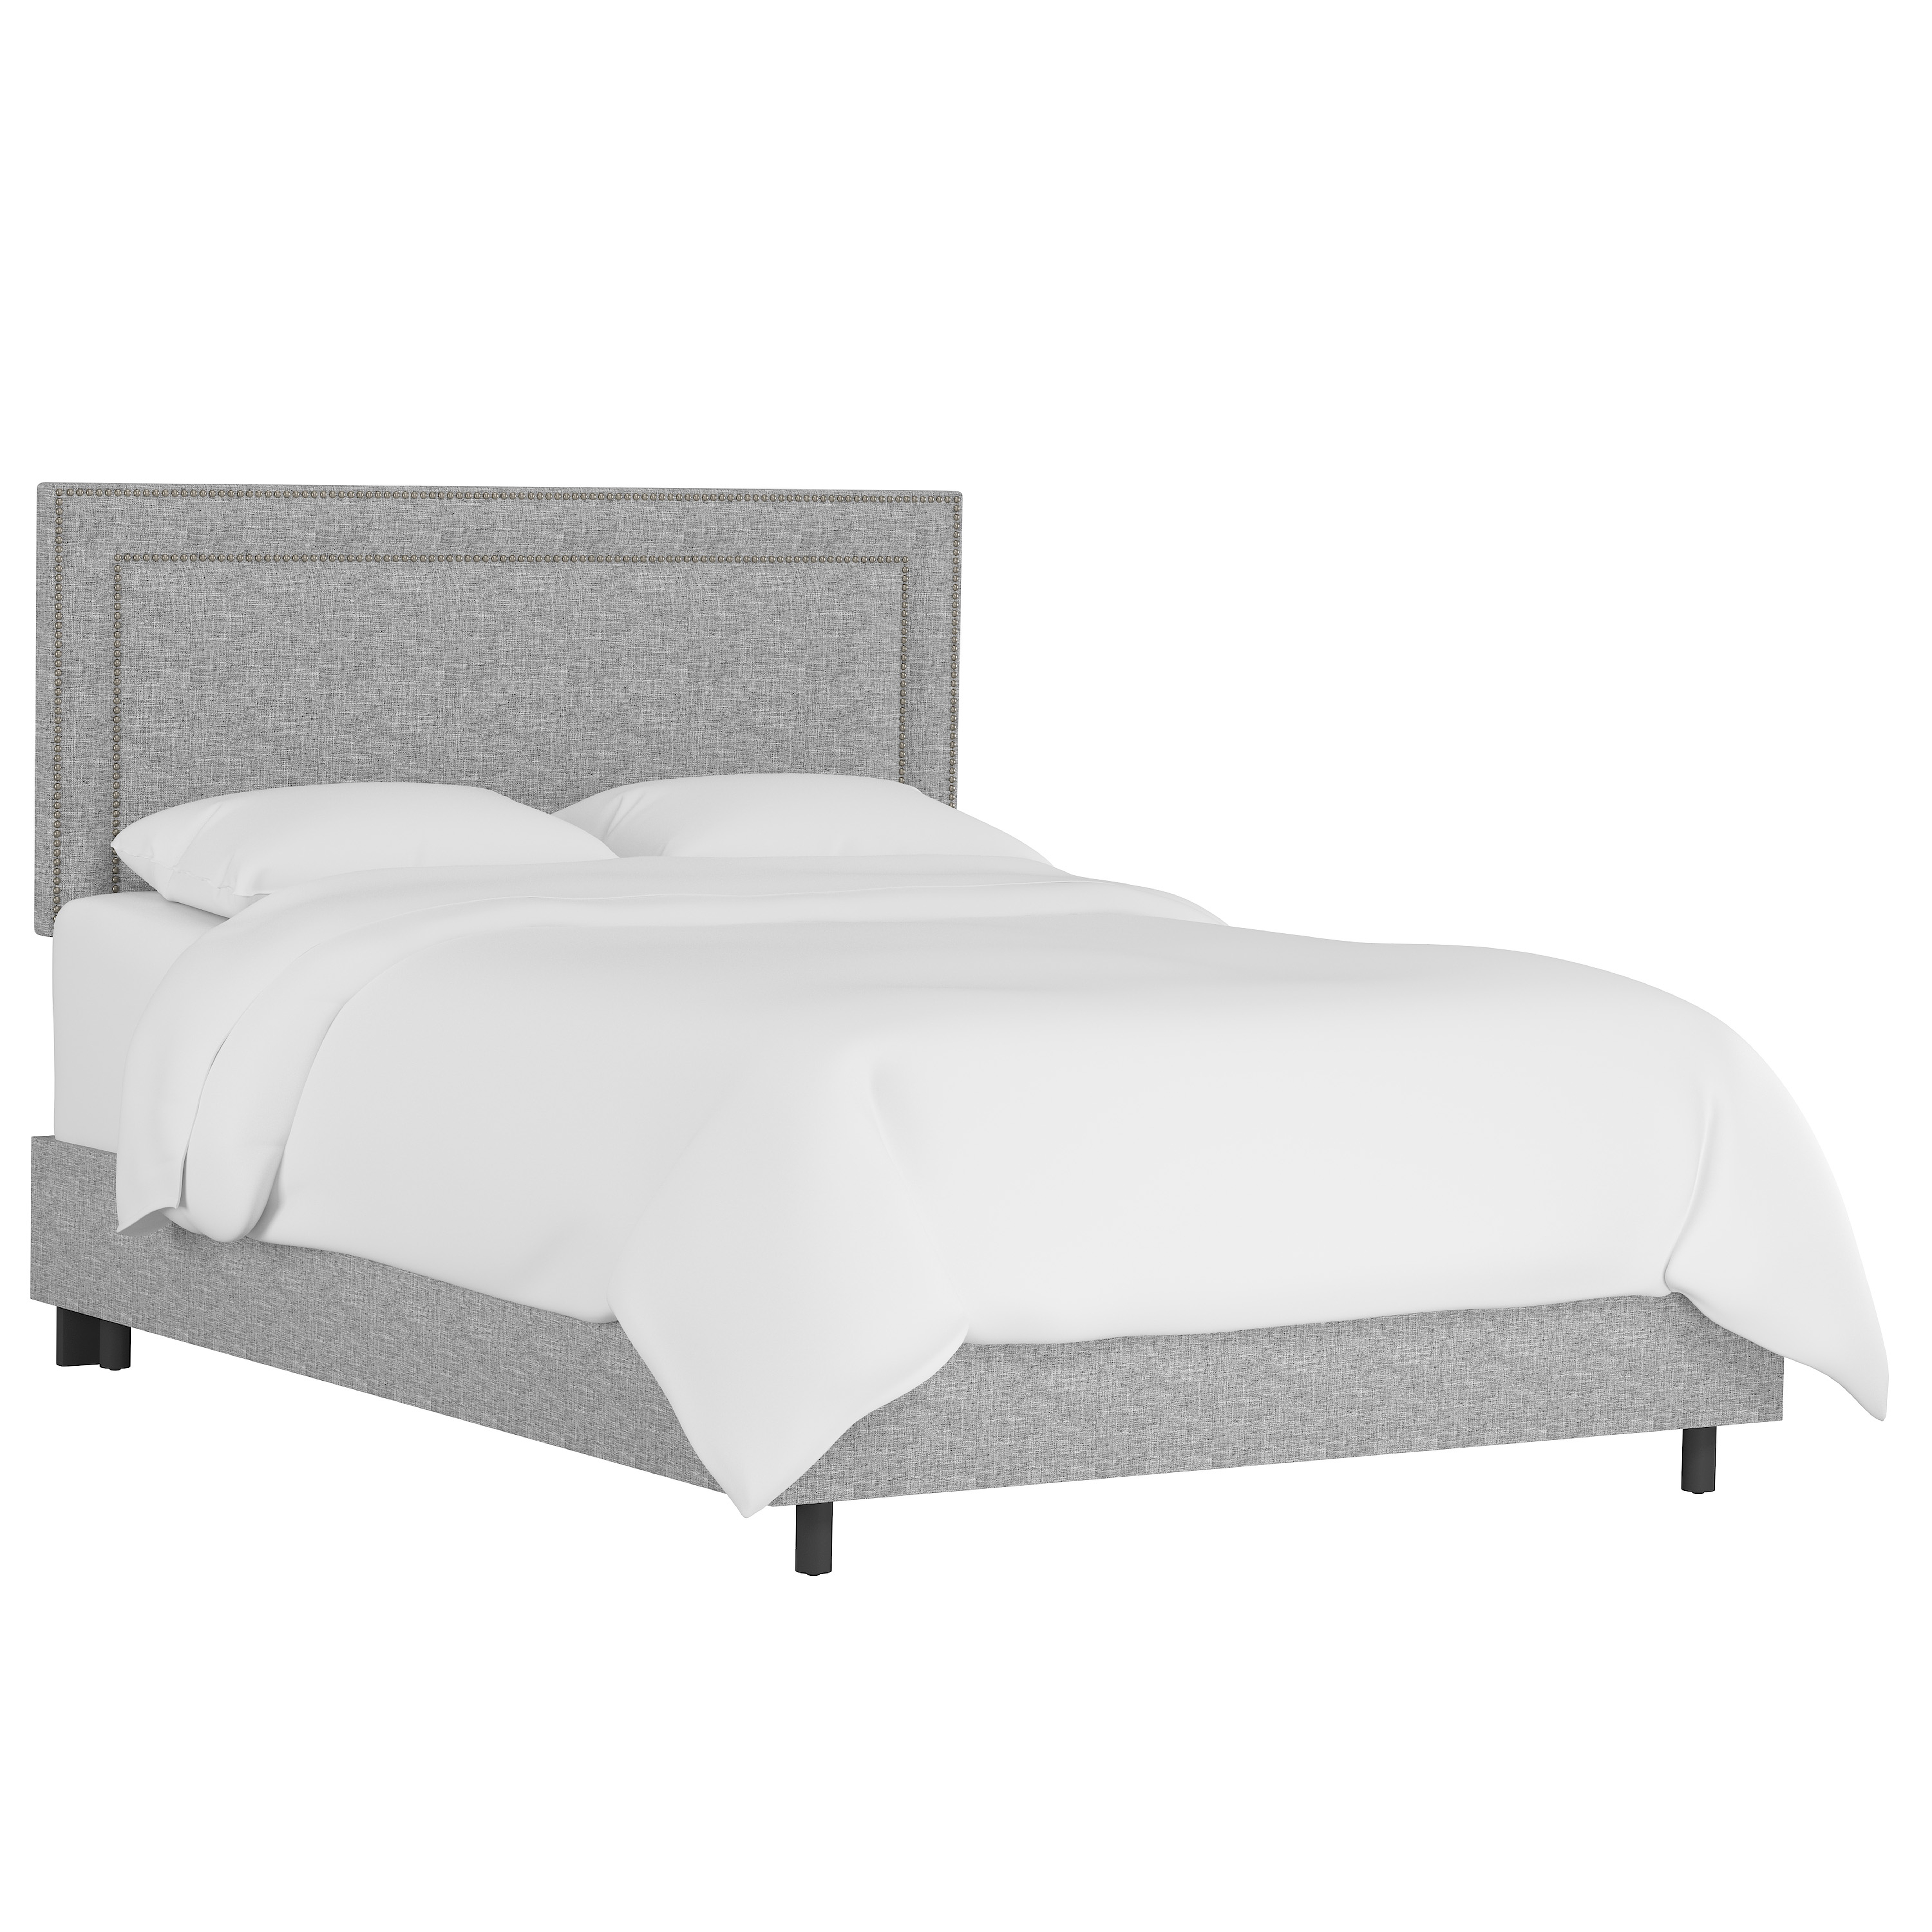 Williams Bed, Queen, Pumice, Pewter Nailheads - Studio Marcette